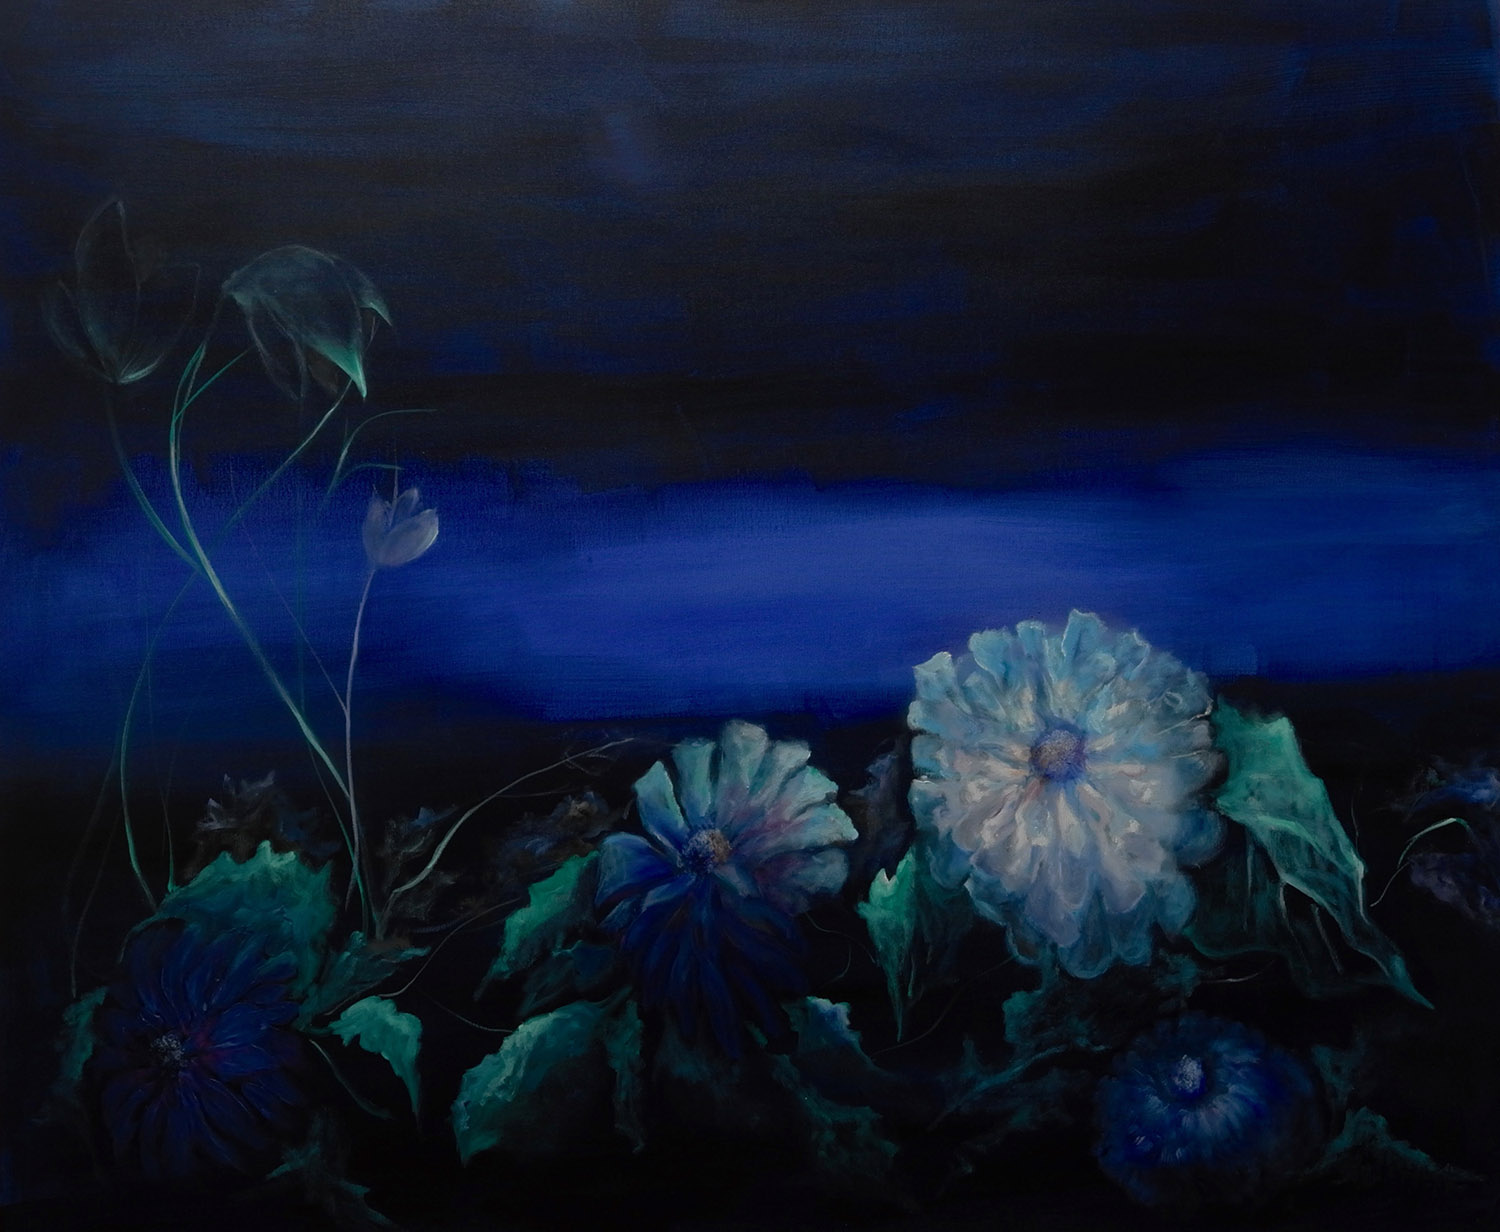  Symphony in Blue/ Oil on canvas 120x100 cm/2019 